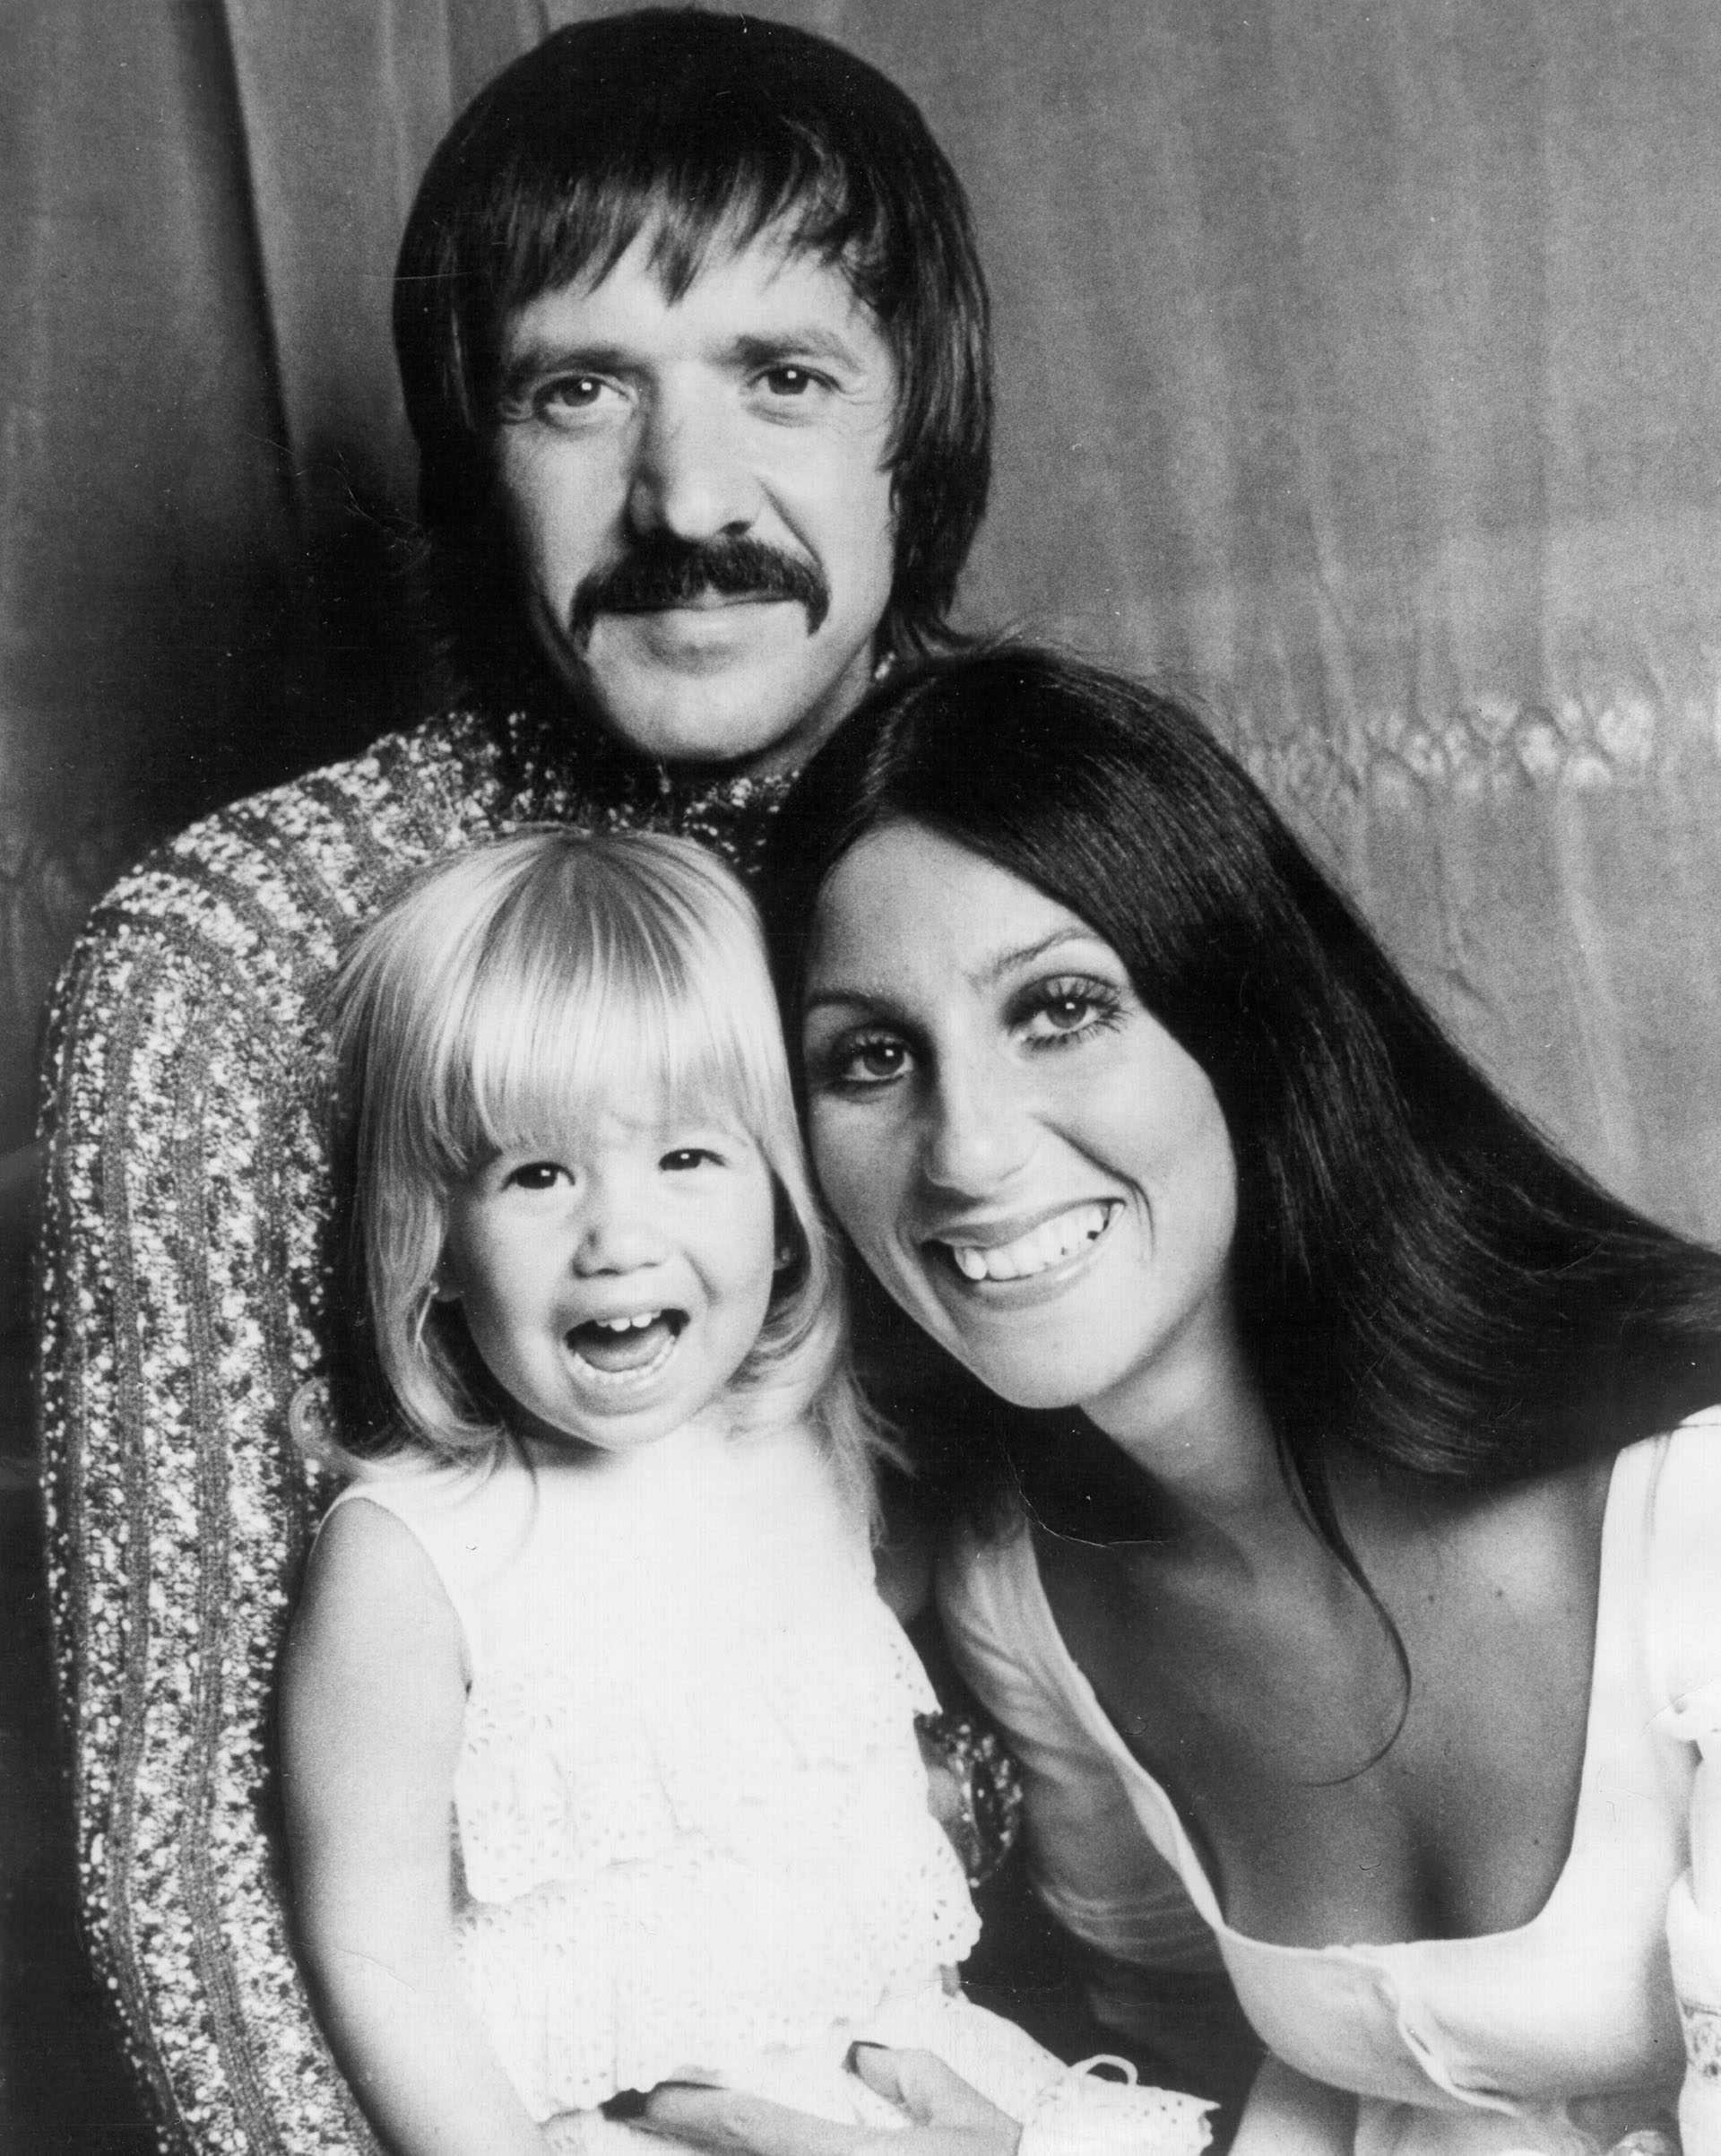 A 1979 family portrait of the singer-actress with husband Sonny Bono and daughter Chastity Bono (Photo by Michael Ochs Archives/Getty Images)